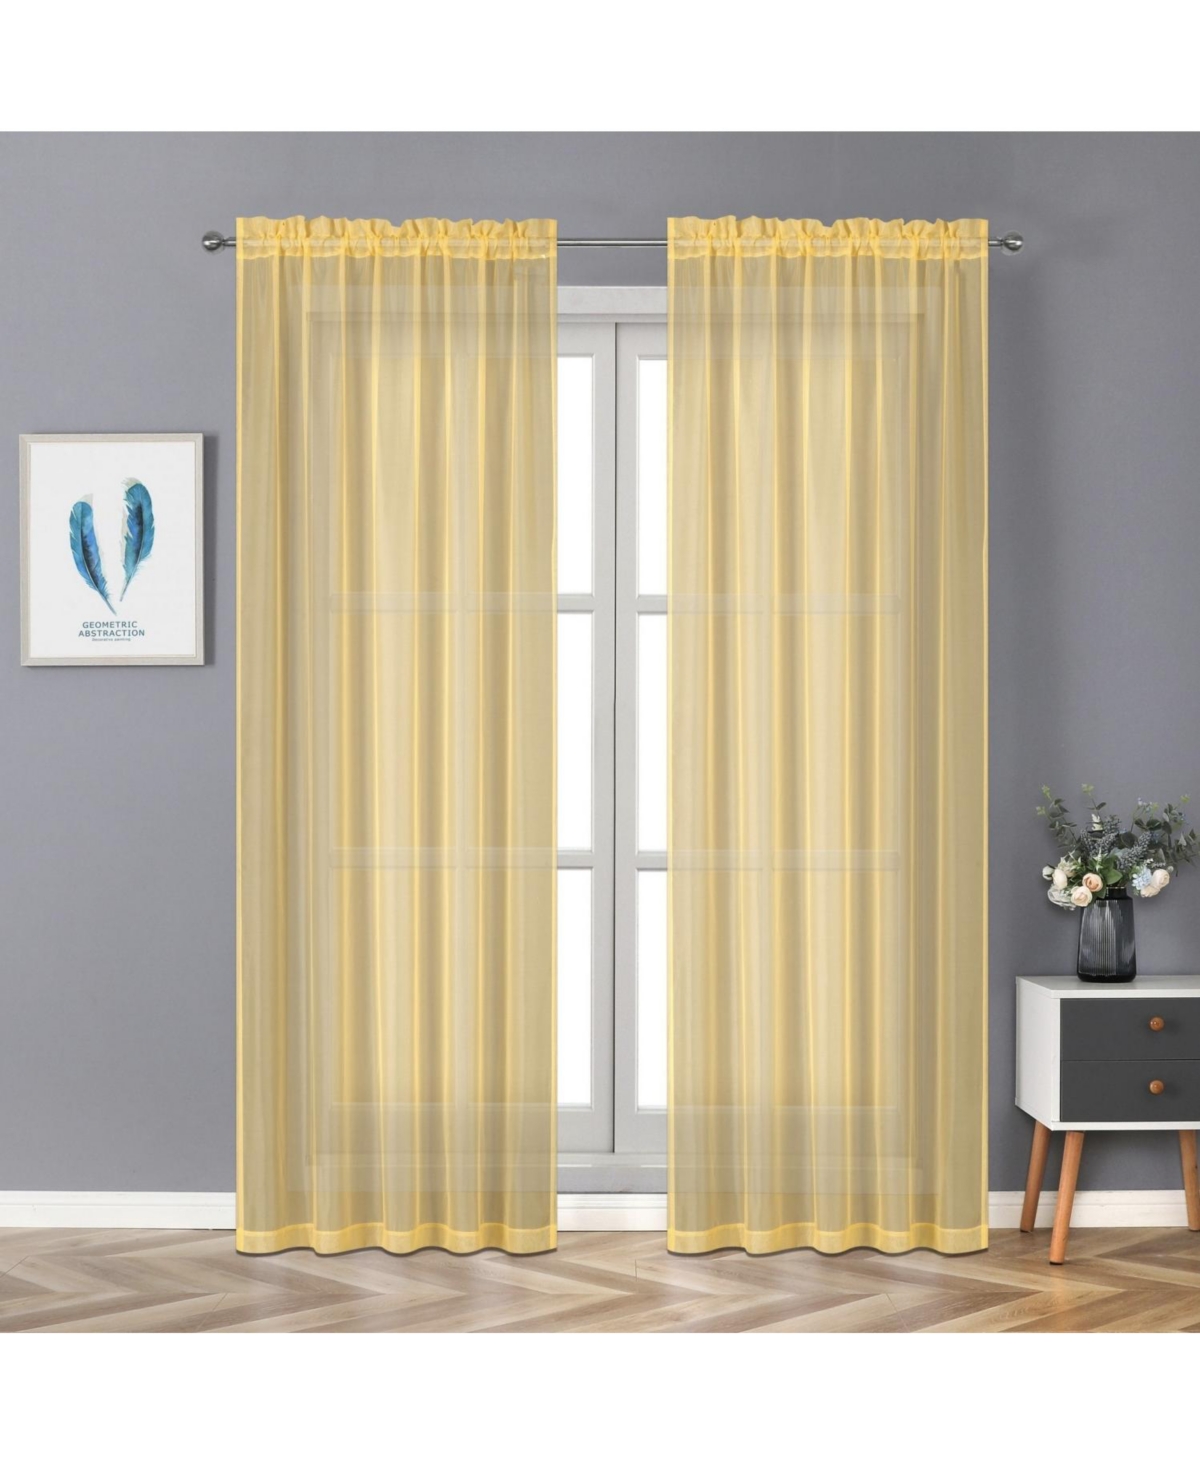 Montauk Accents Ultra Lux 2 Piece Rod Pocket Gold Sheer Voile Window Curtain Panels - 84 in. Long - Gold